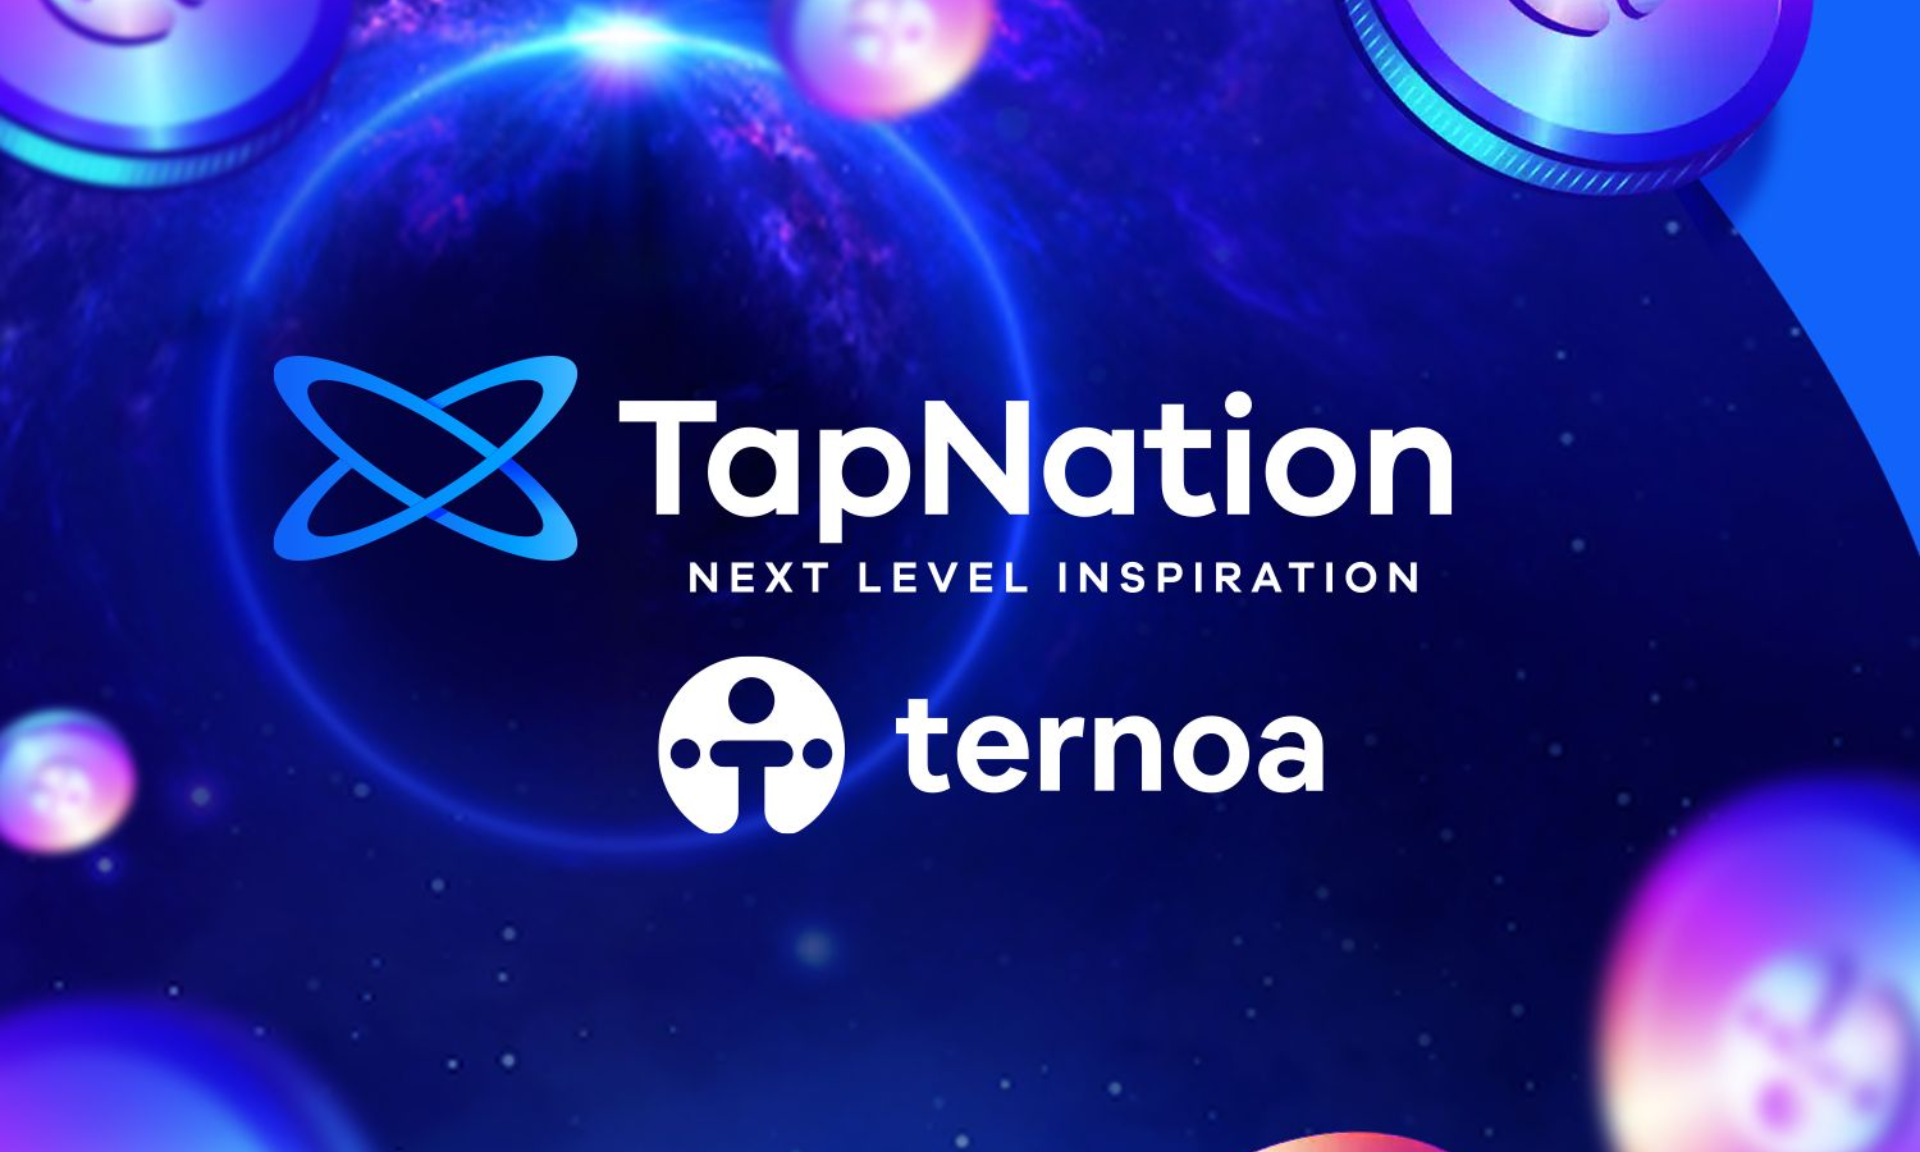 TapNation has become one of the leading web3 companies in France